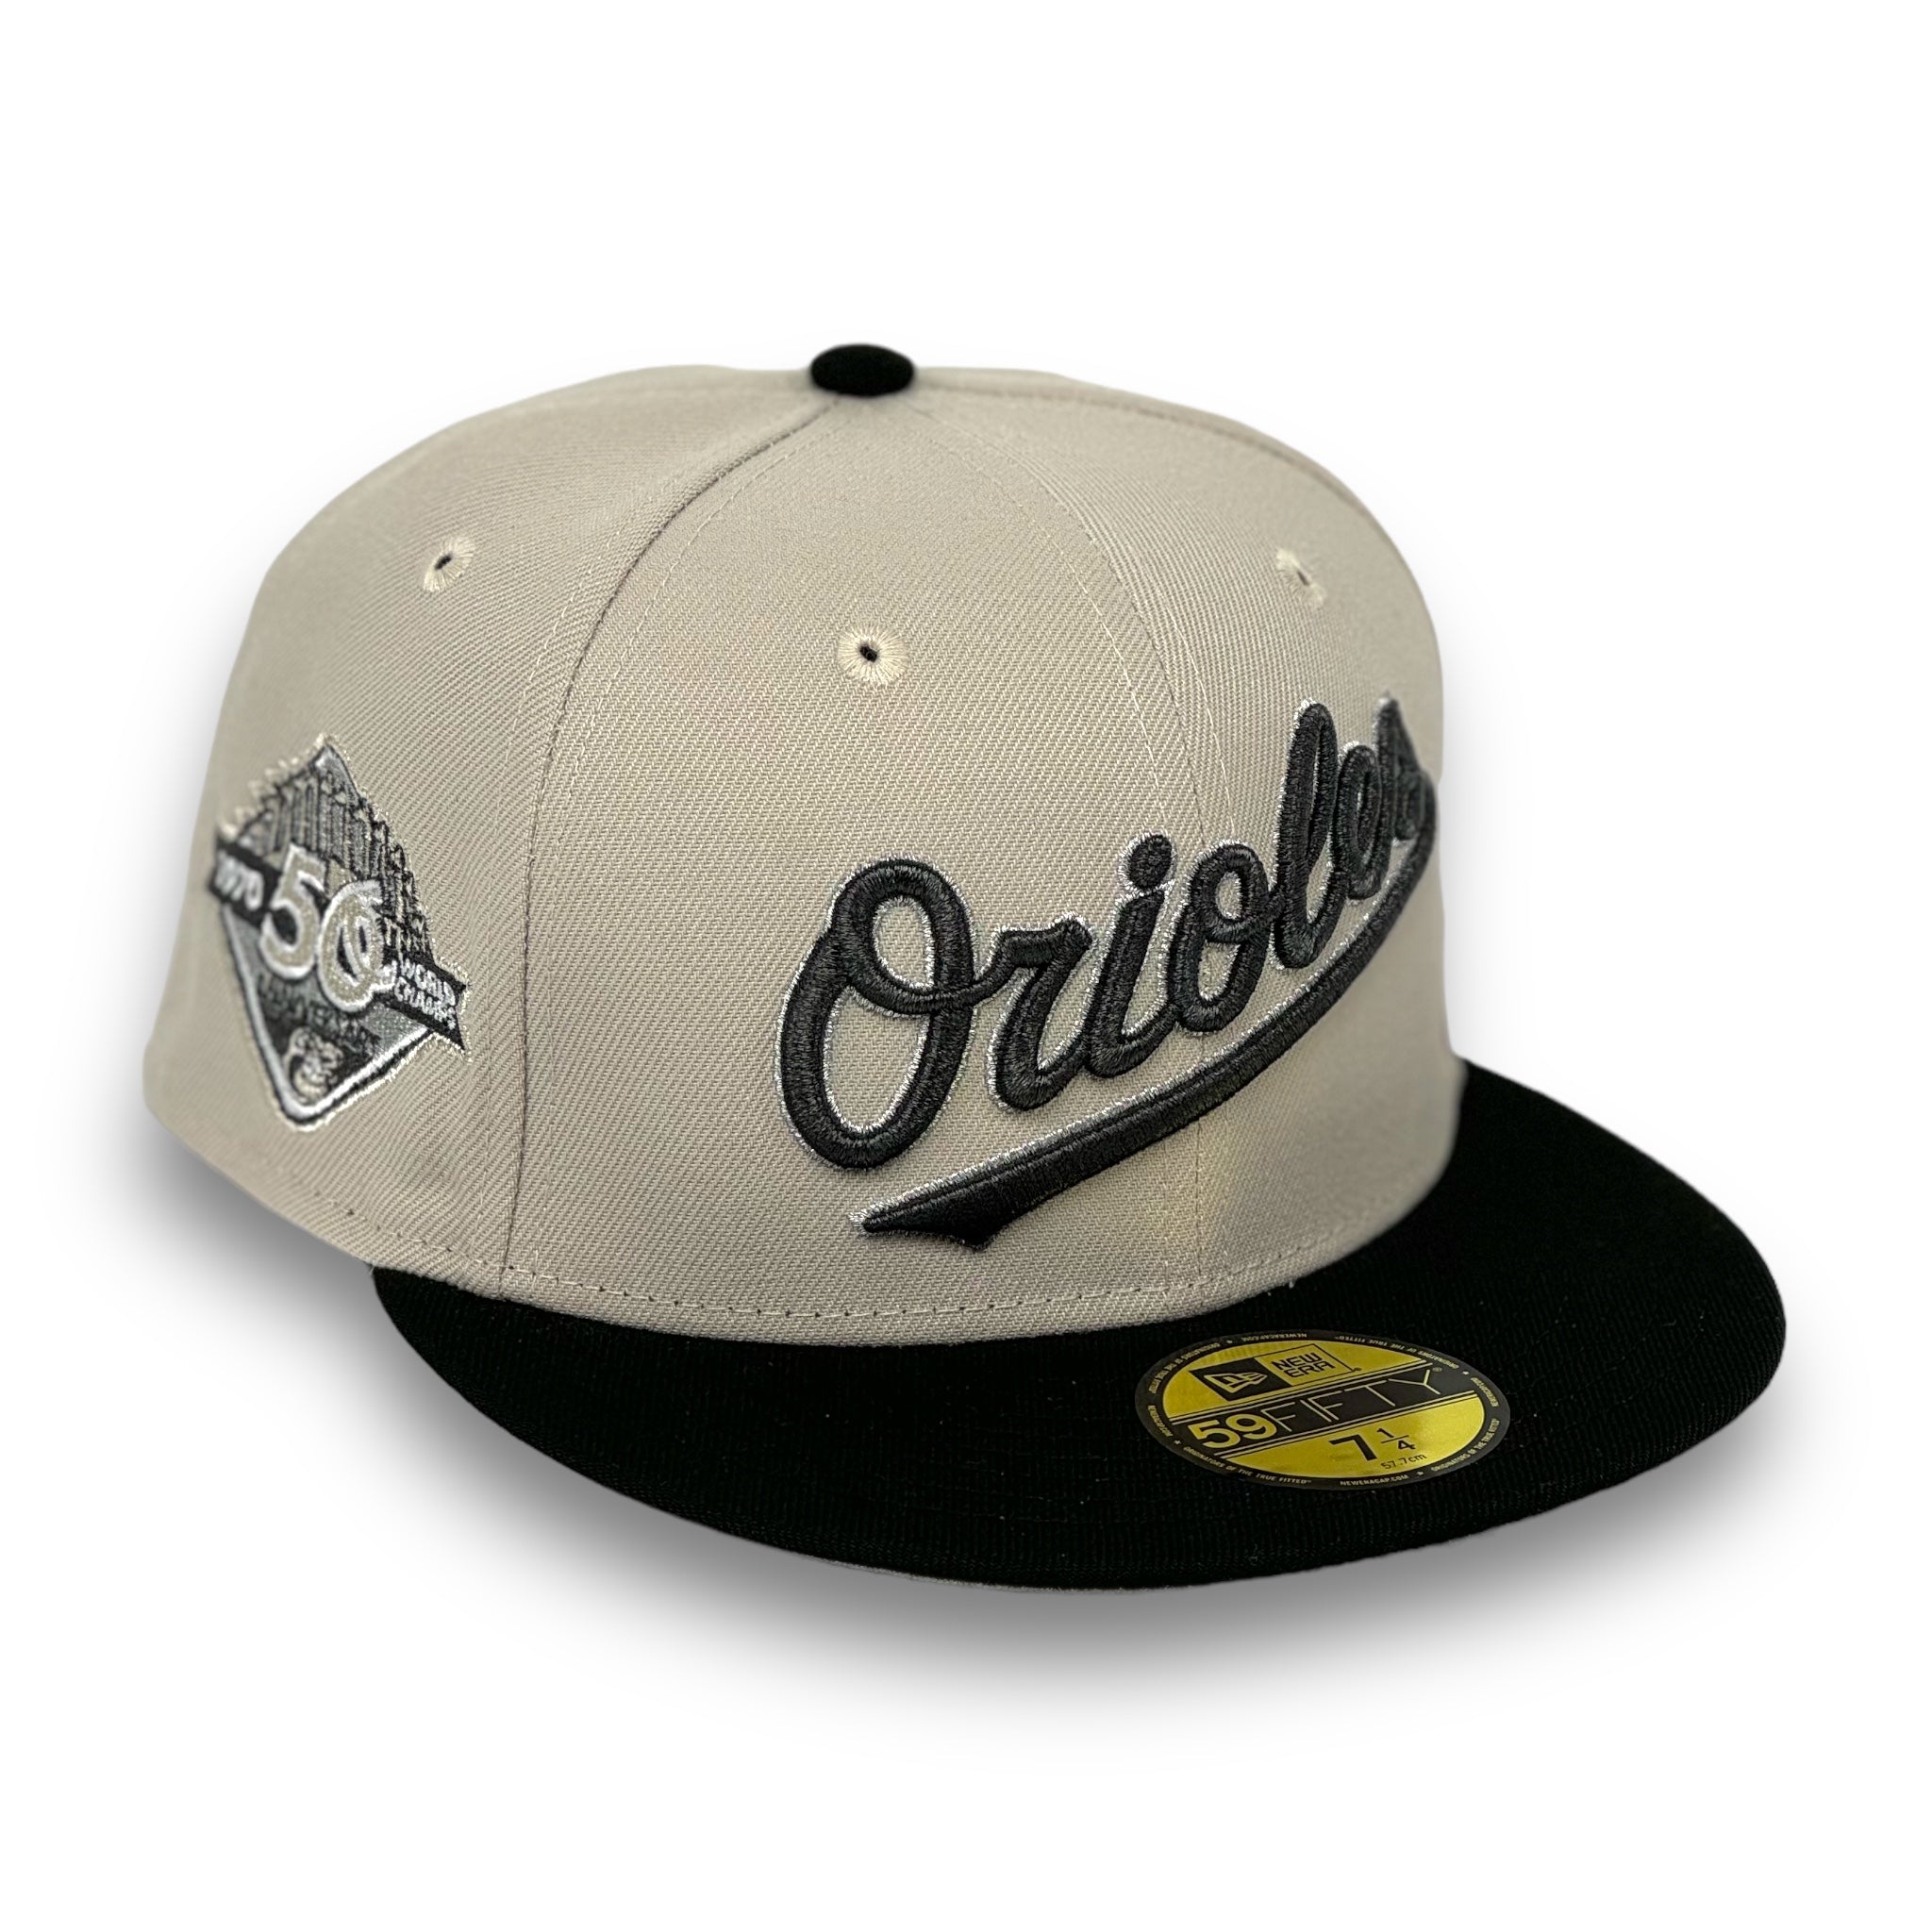 BALTIMORE ORIOLES (STONE) (50TH ANN) NEW ERA 59FIFTY FITTED